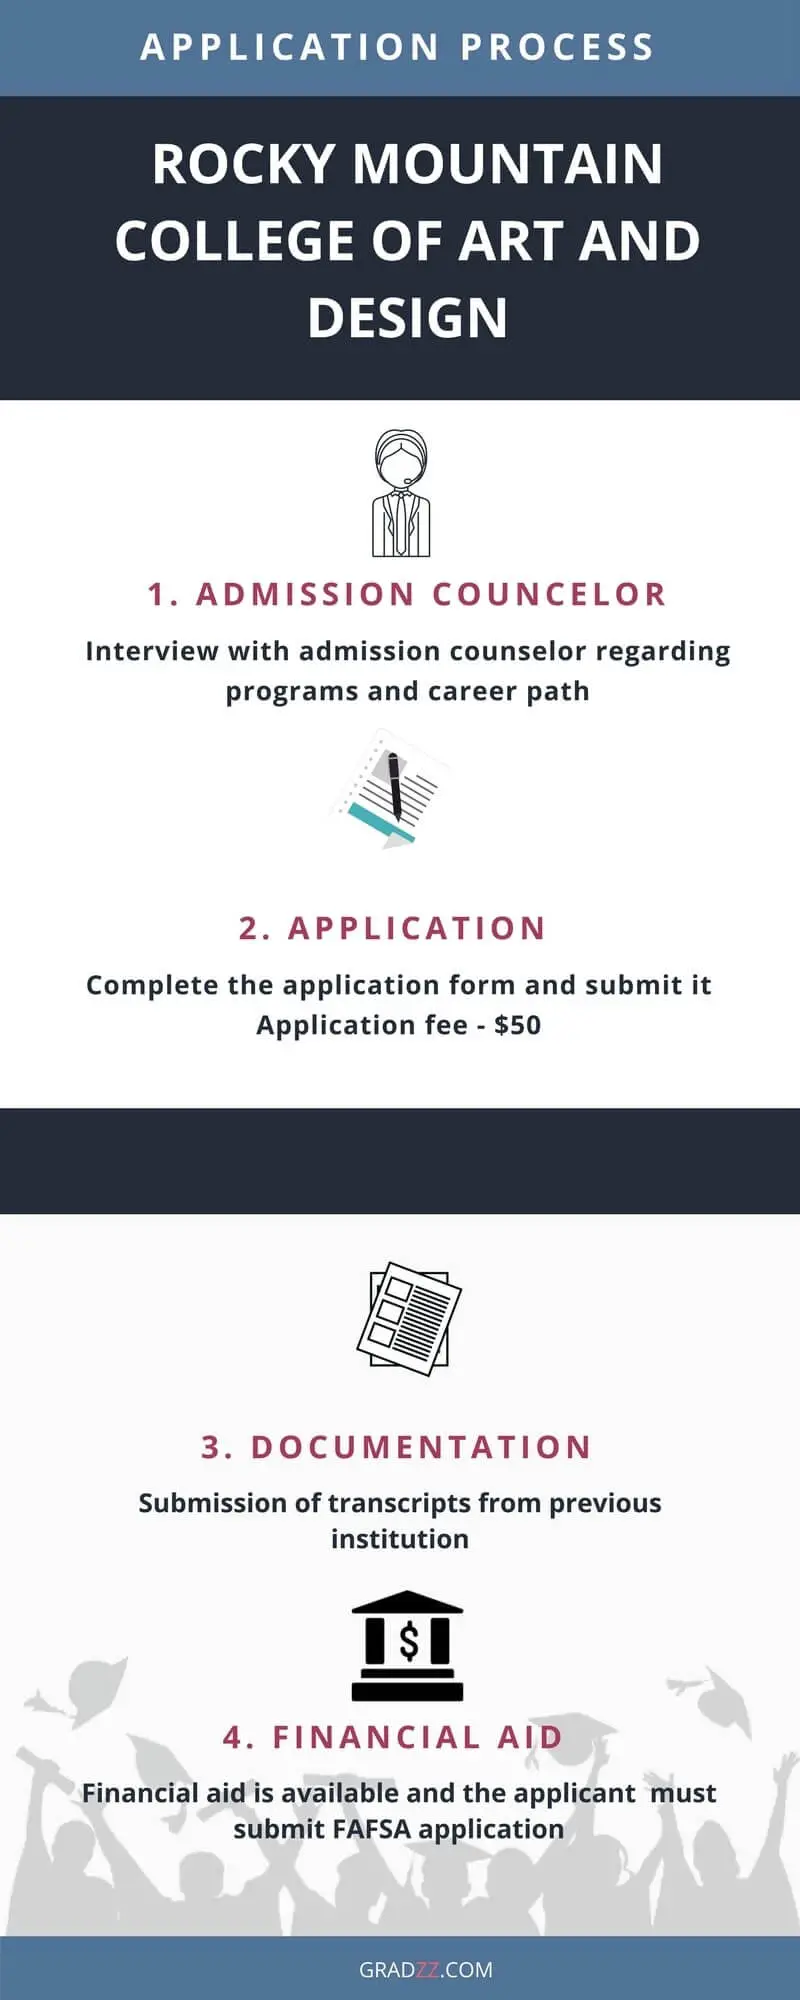 Rocky Mountain College of Art and Design Admission Process